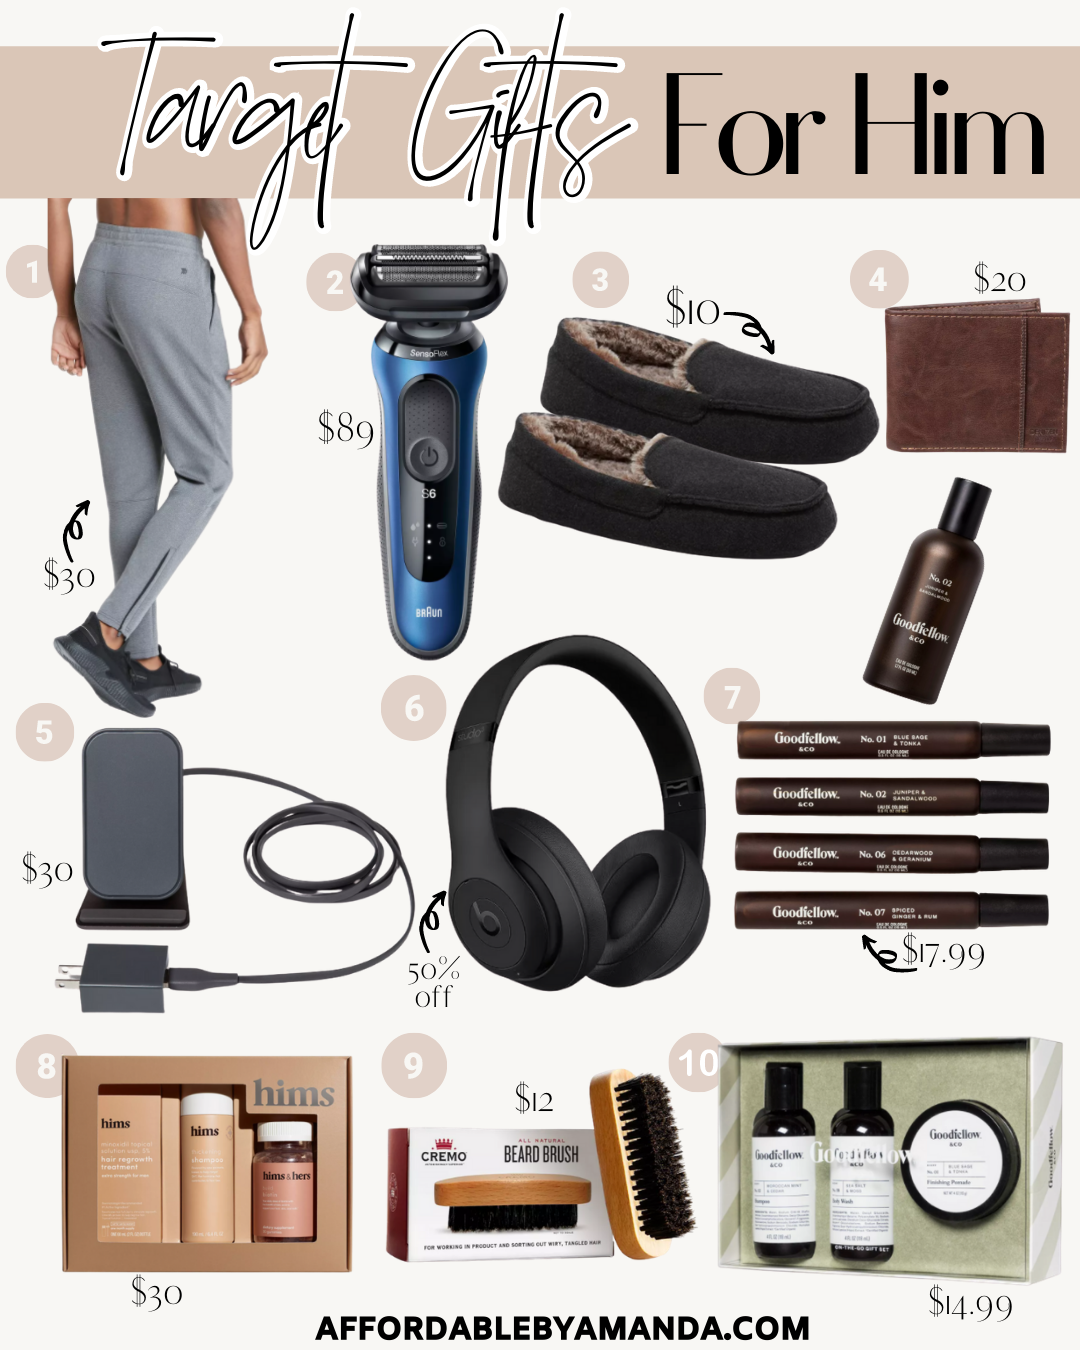 Target Gifts for Him | Gifts for Boyfriend - Best Gifts from Target | Affordable by Amanda